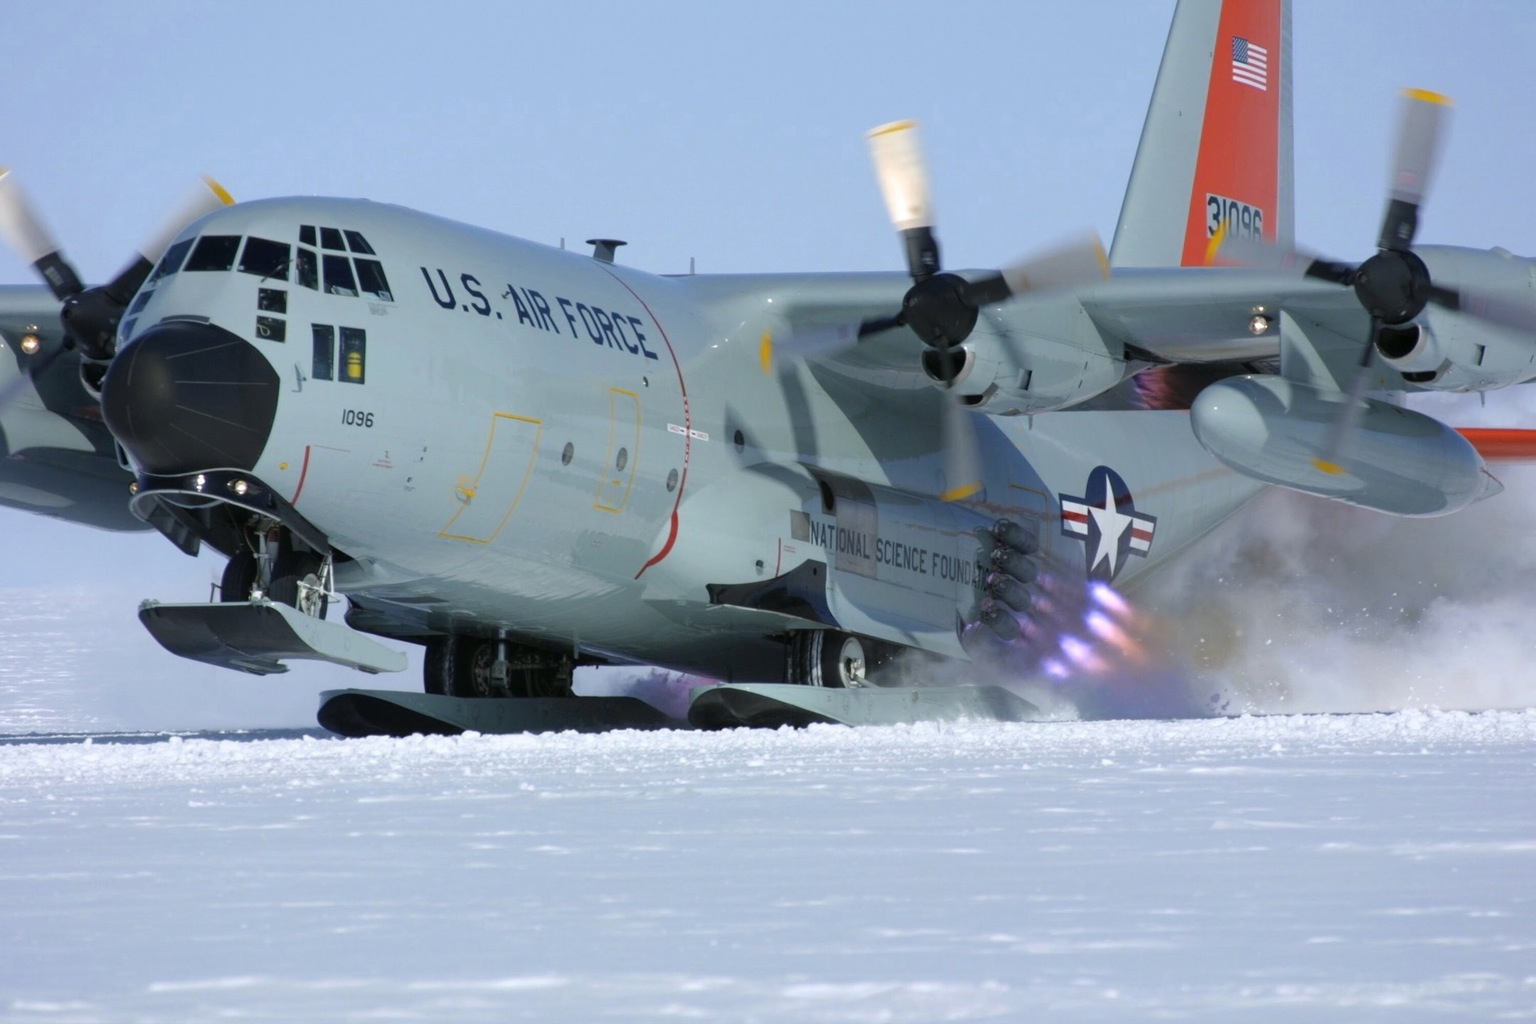  Obscure C-130 Hercules Facts - Fact 4